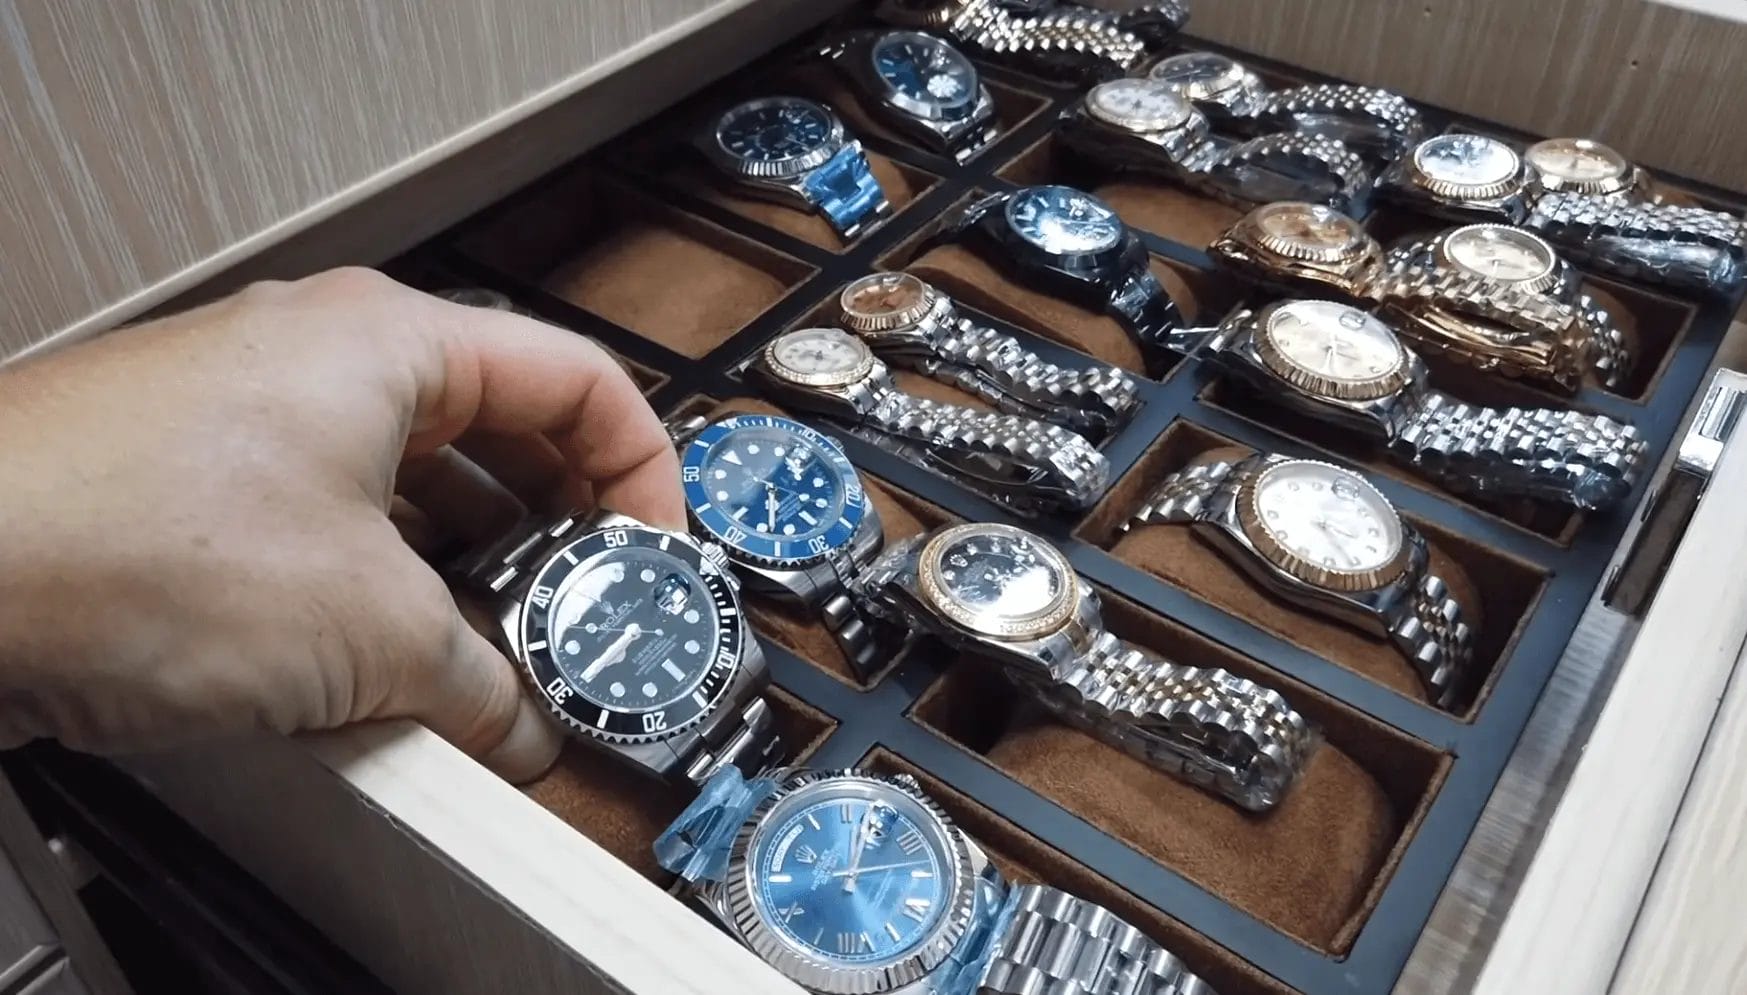 replica watches in the watch box